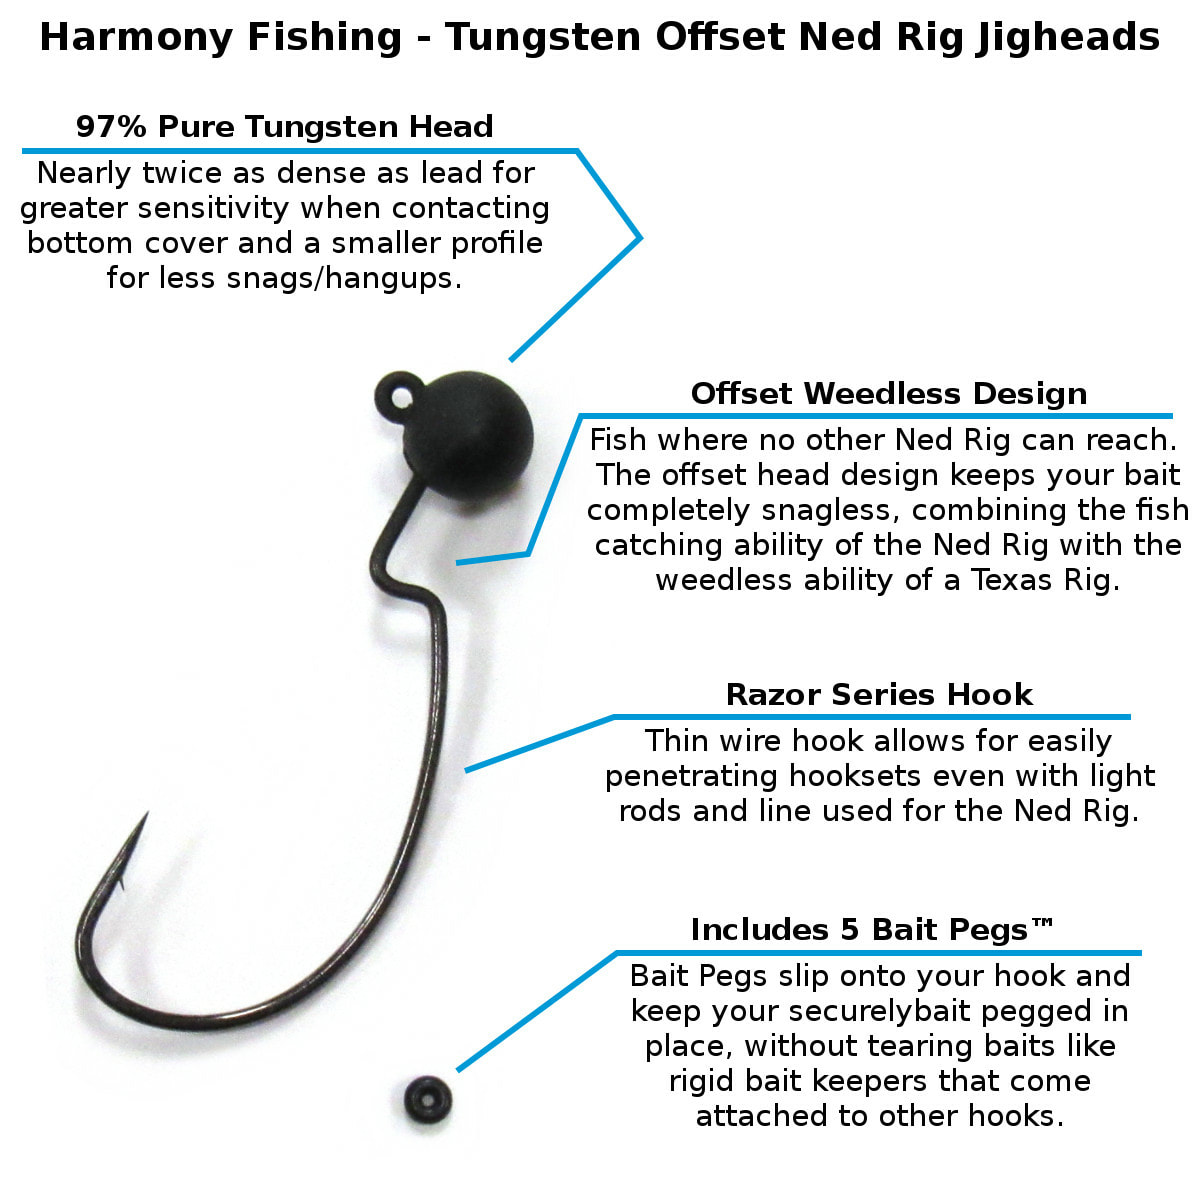 Tungsten Offset Weedless Ned Rig Jigheads for bass fishing